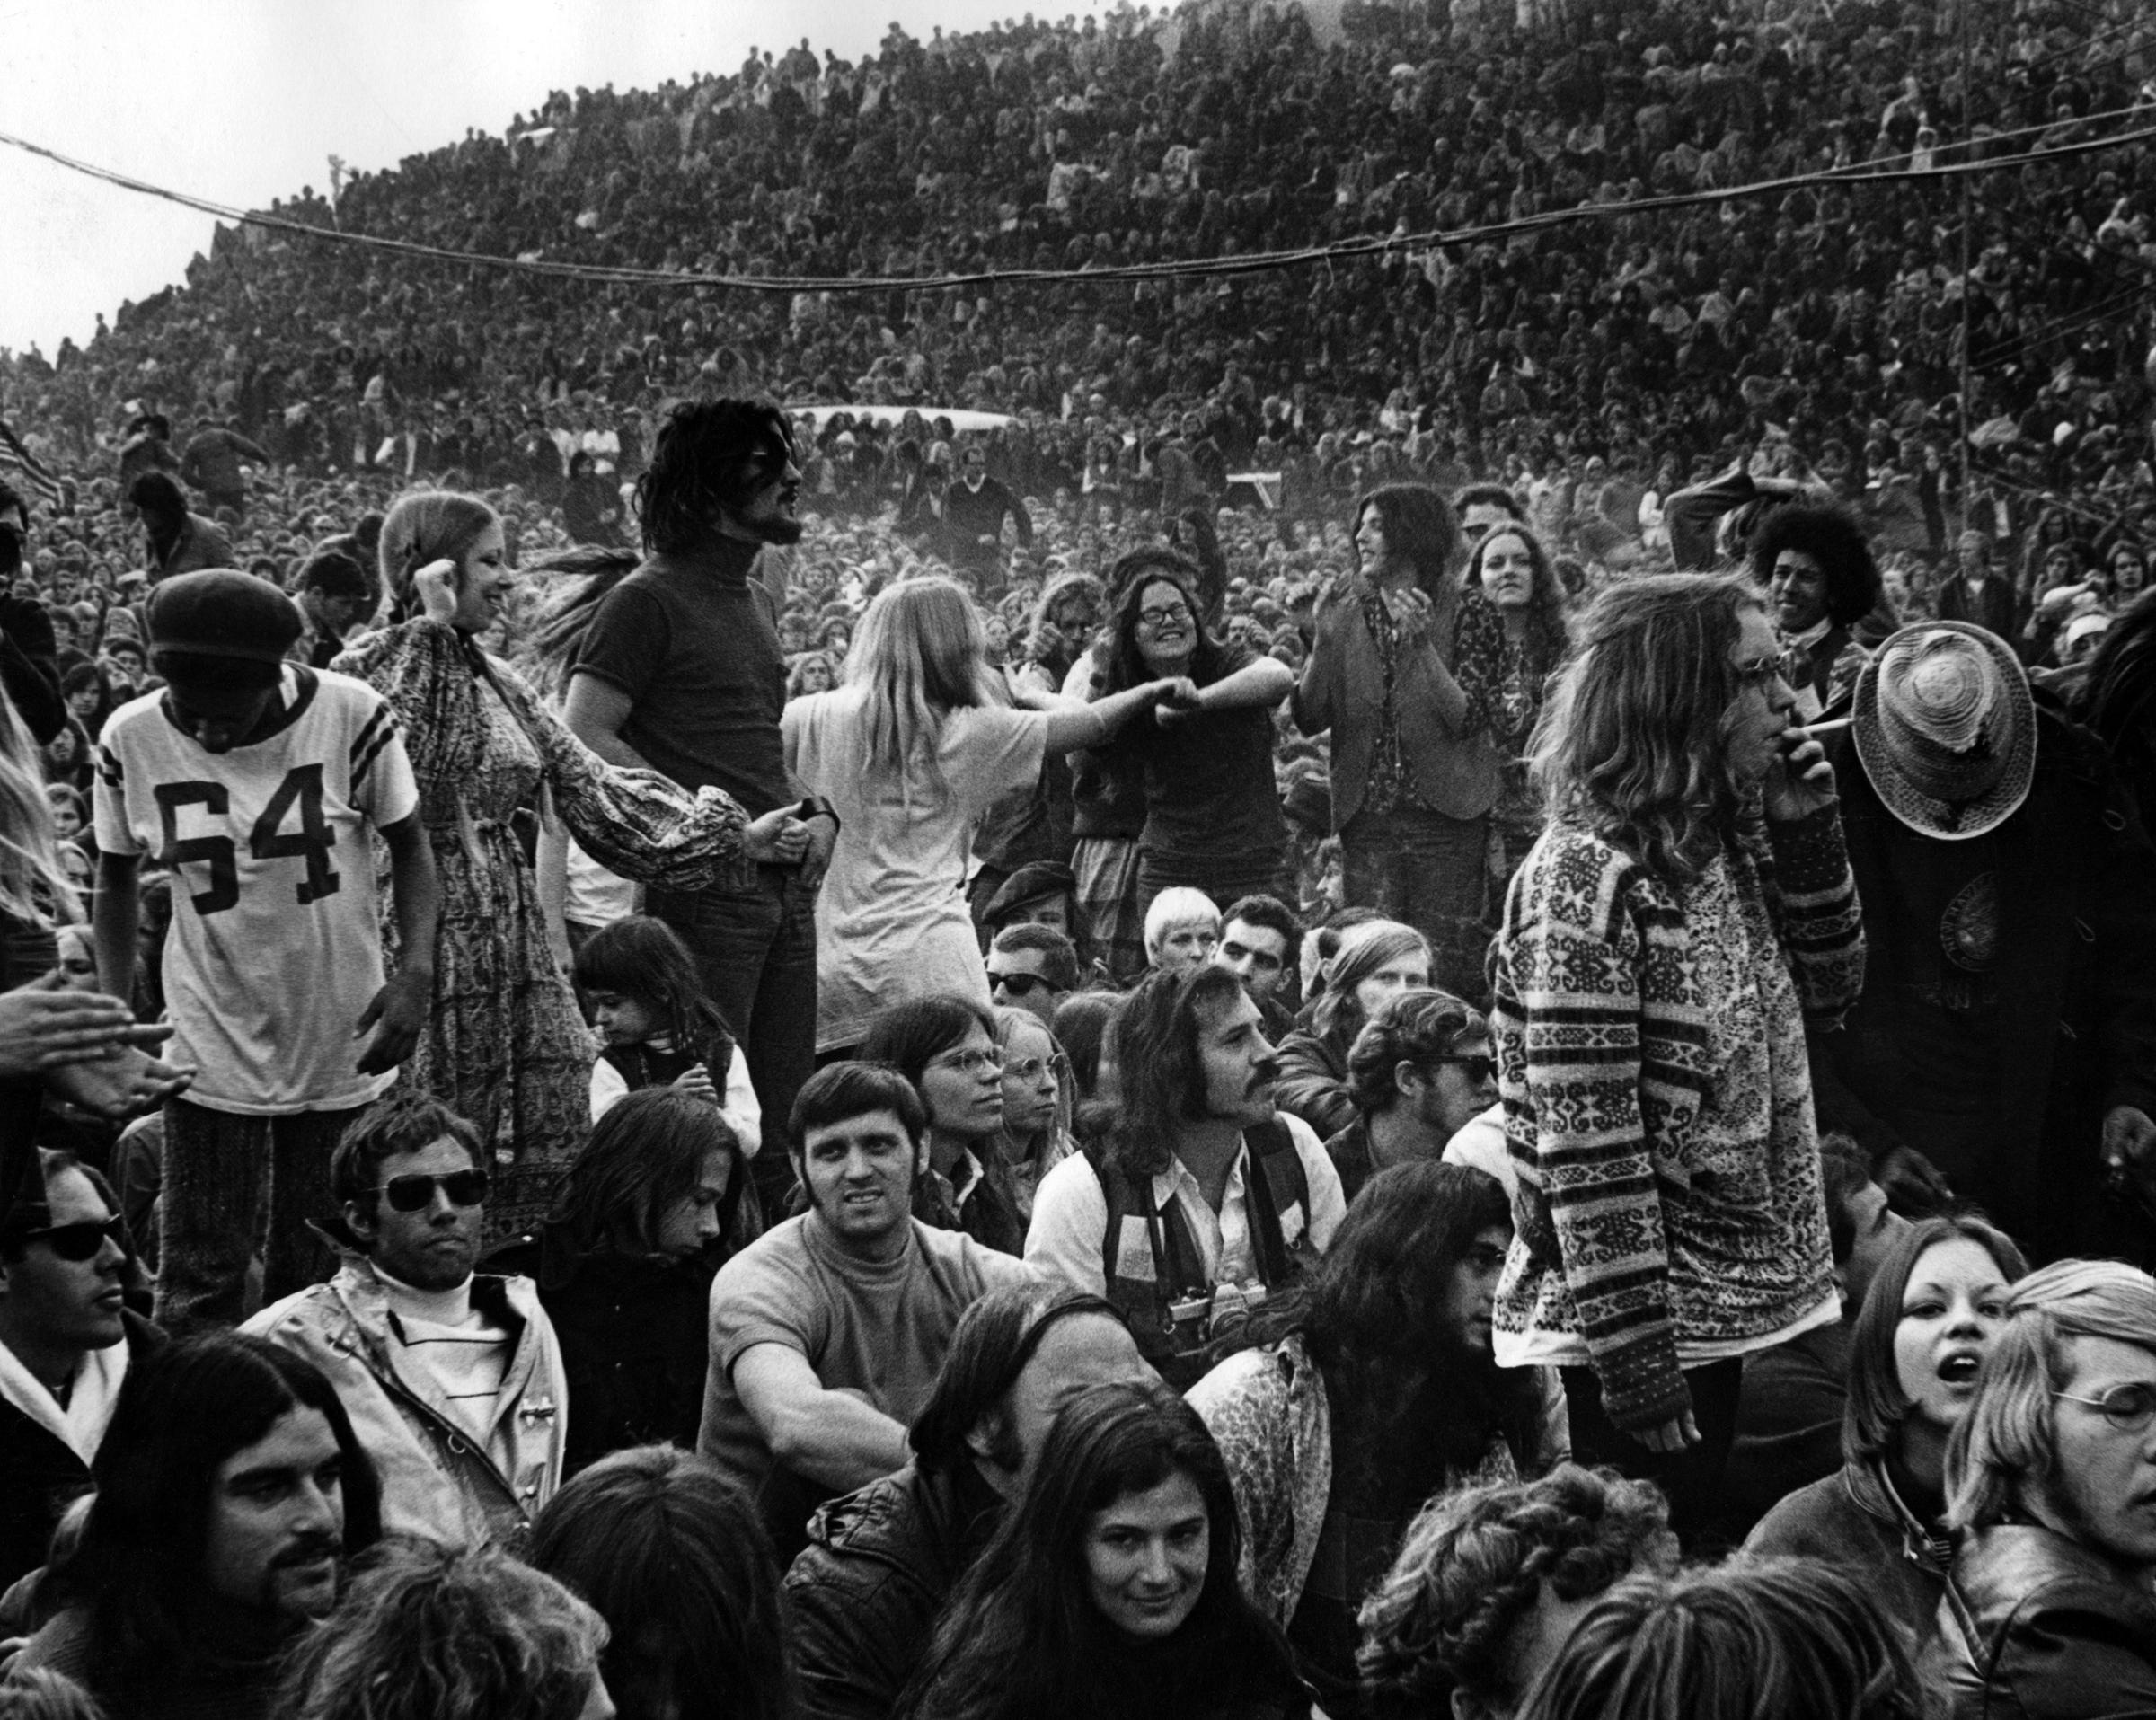 The Crowd At Altamont